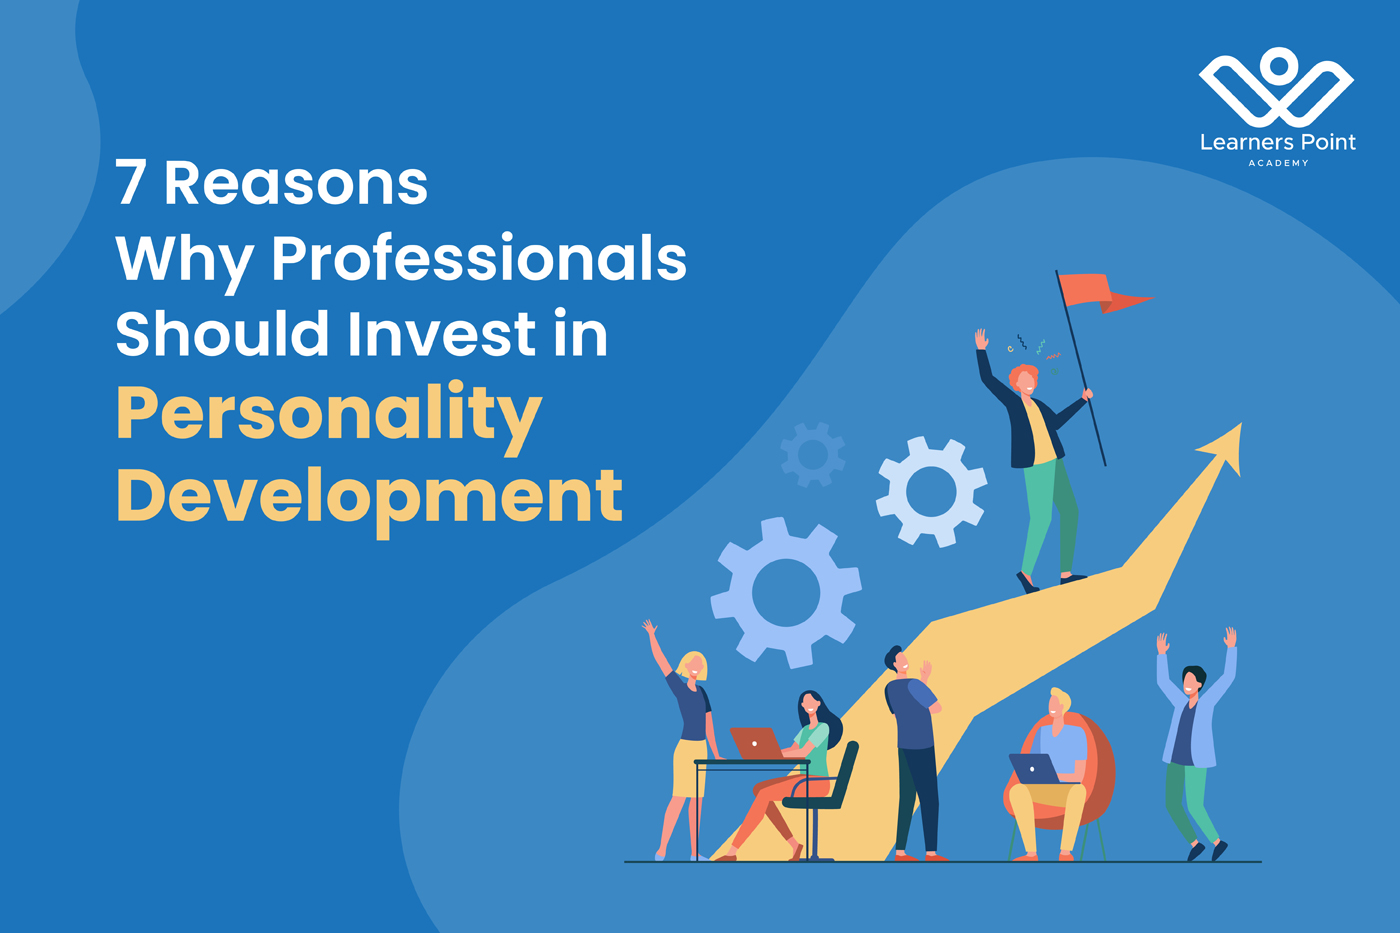 7 Reasons Why Professionals Should Invest in Personality Development